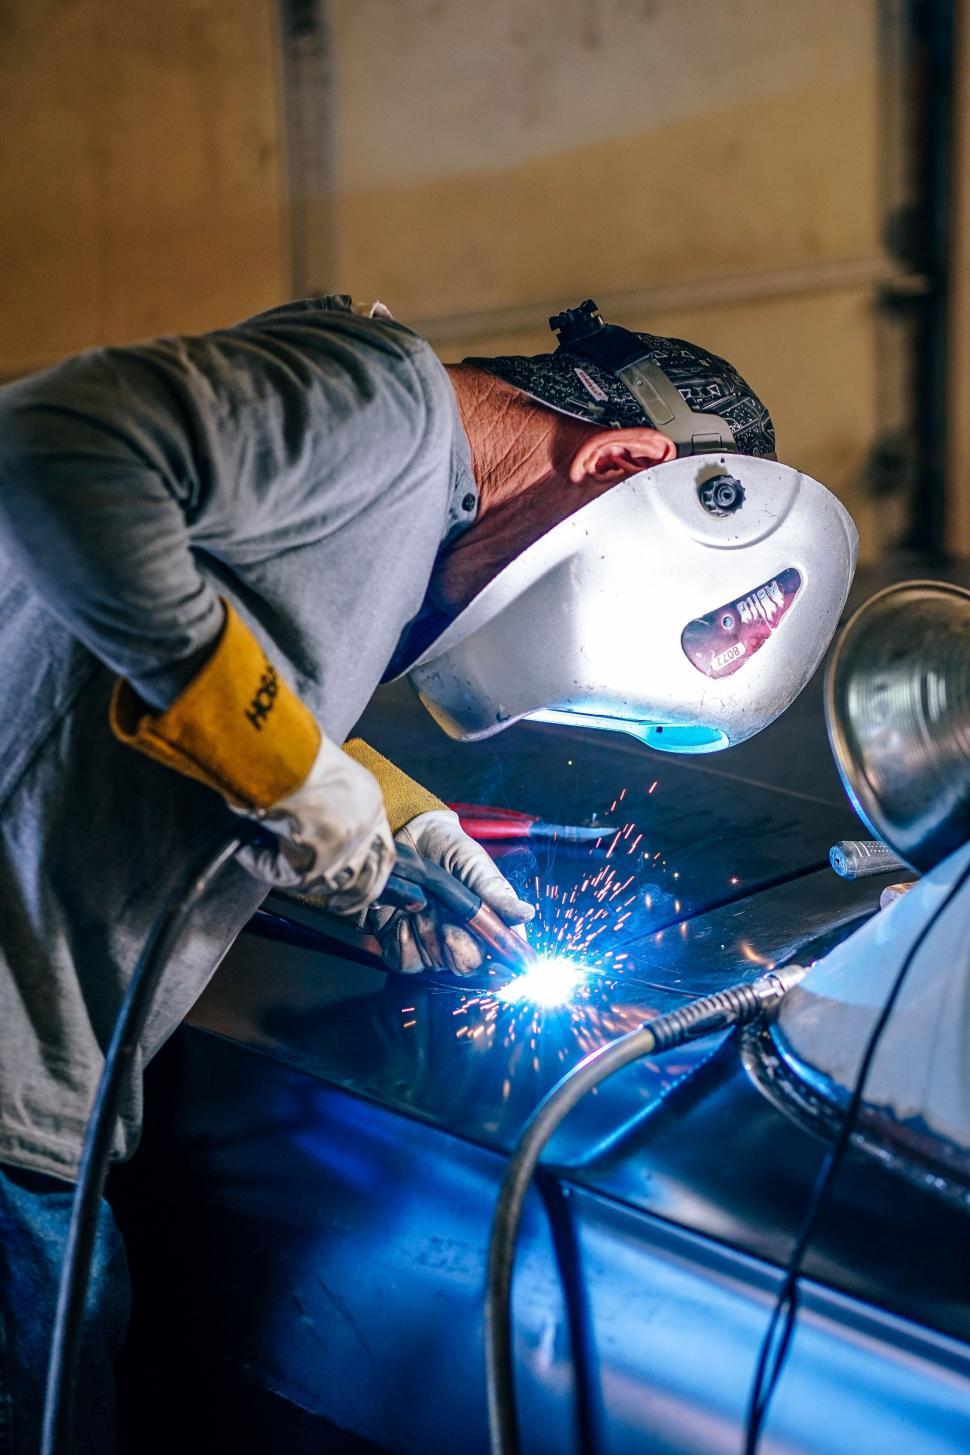 Free Image of Man Welding a Car in a Garage 